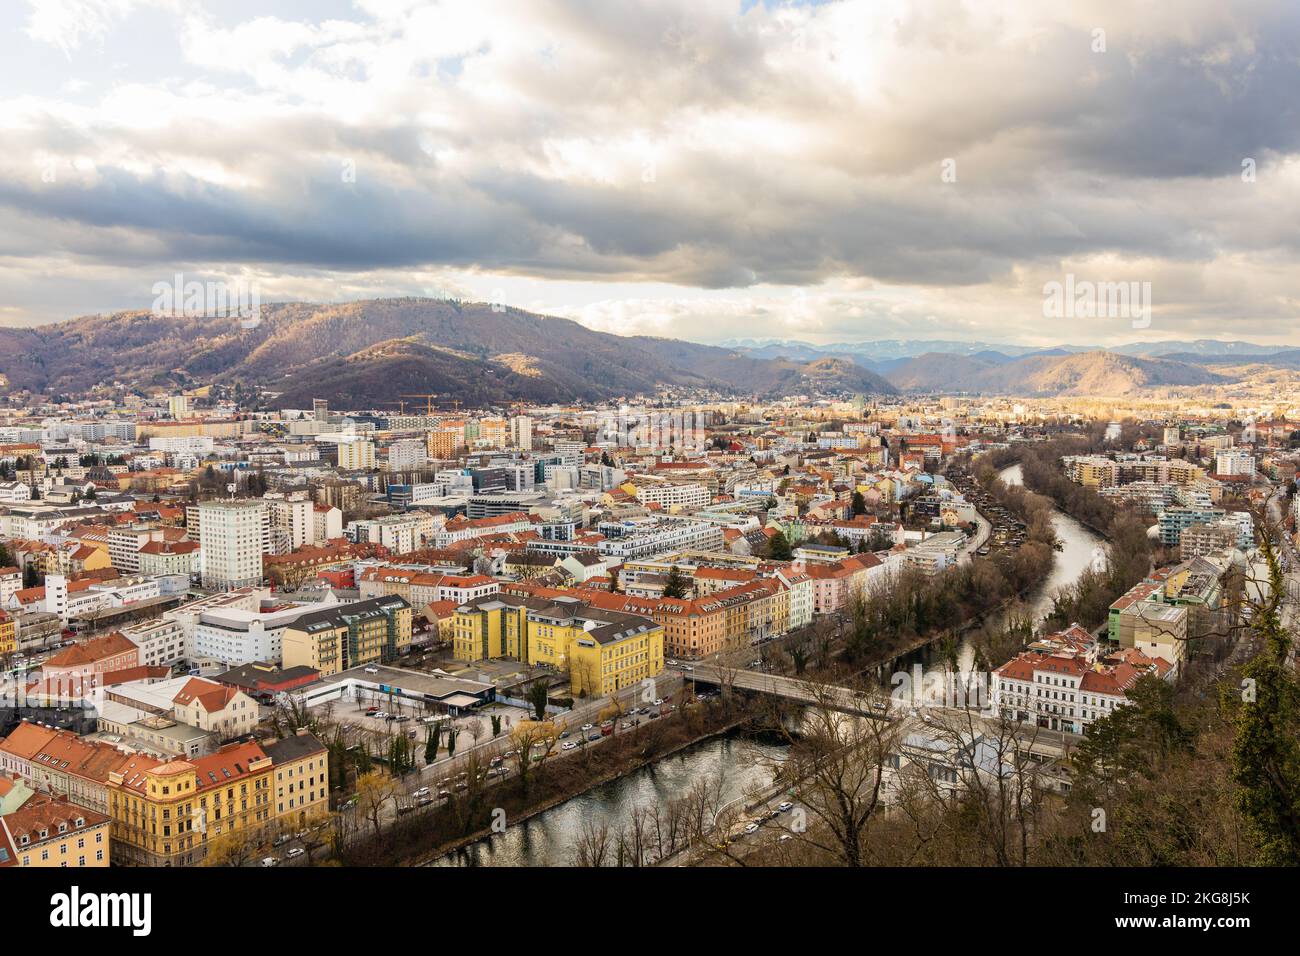 Cityscape of Graz, Mur river and surrounding mountains. Colorful clouds and sunshine, winter day. Graz, Styria, Austria. Stock Photo